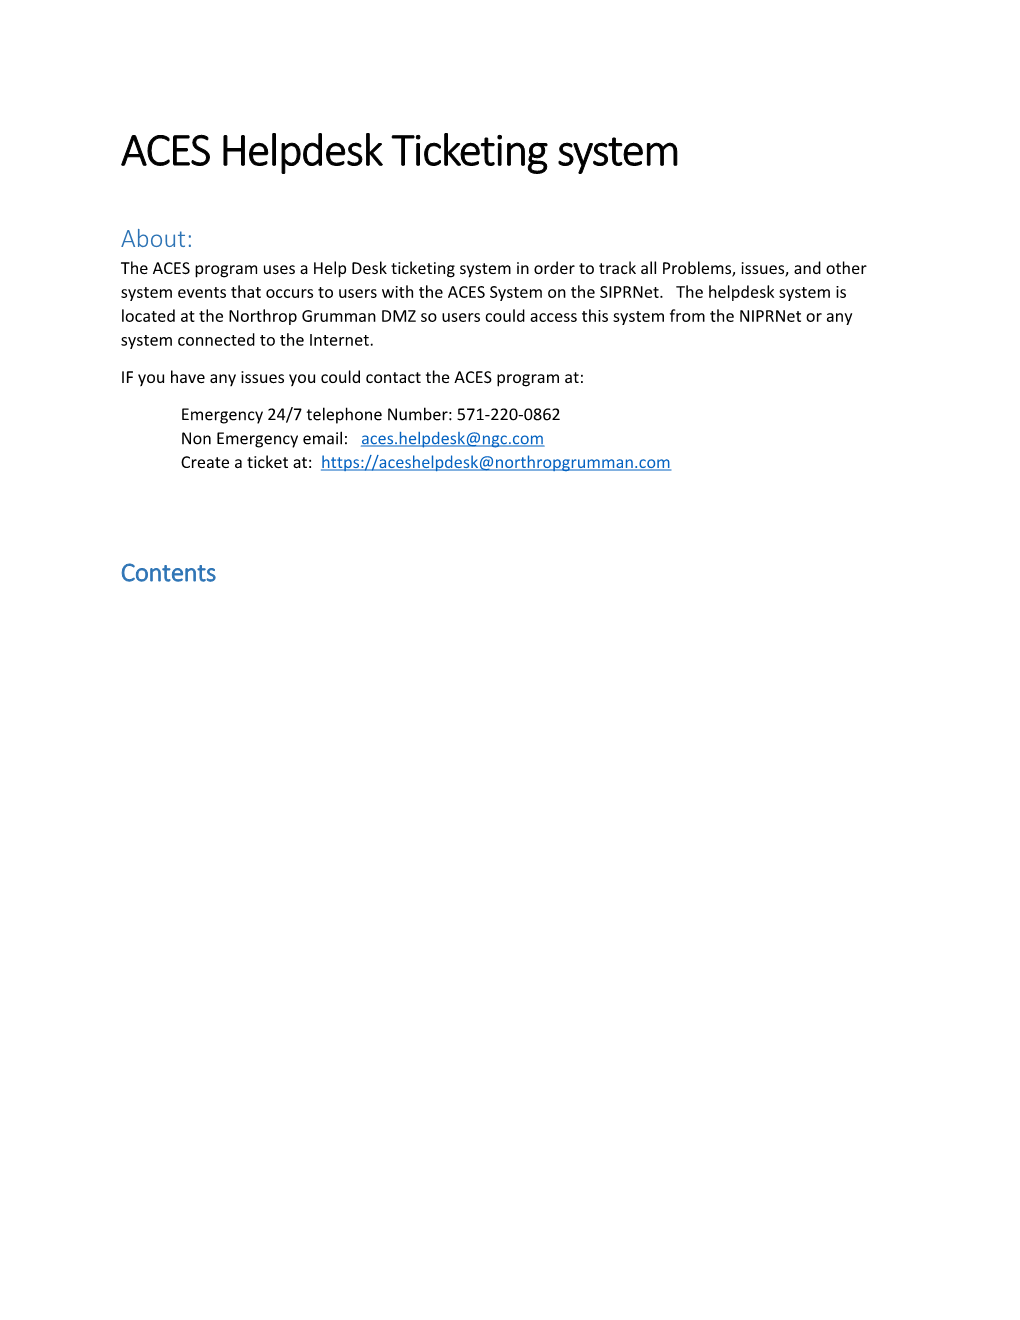 ACES Helpdesk Ticketing System